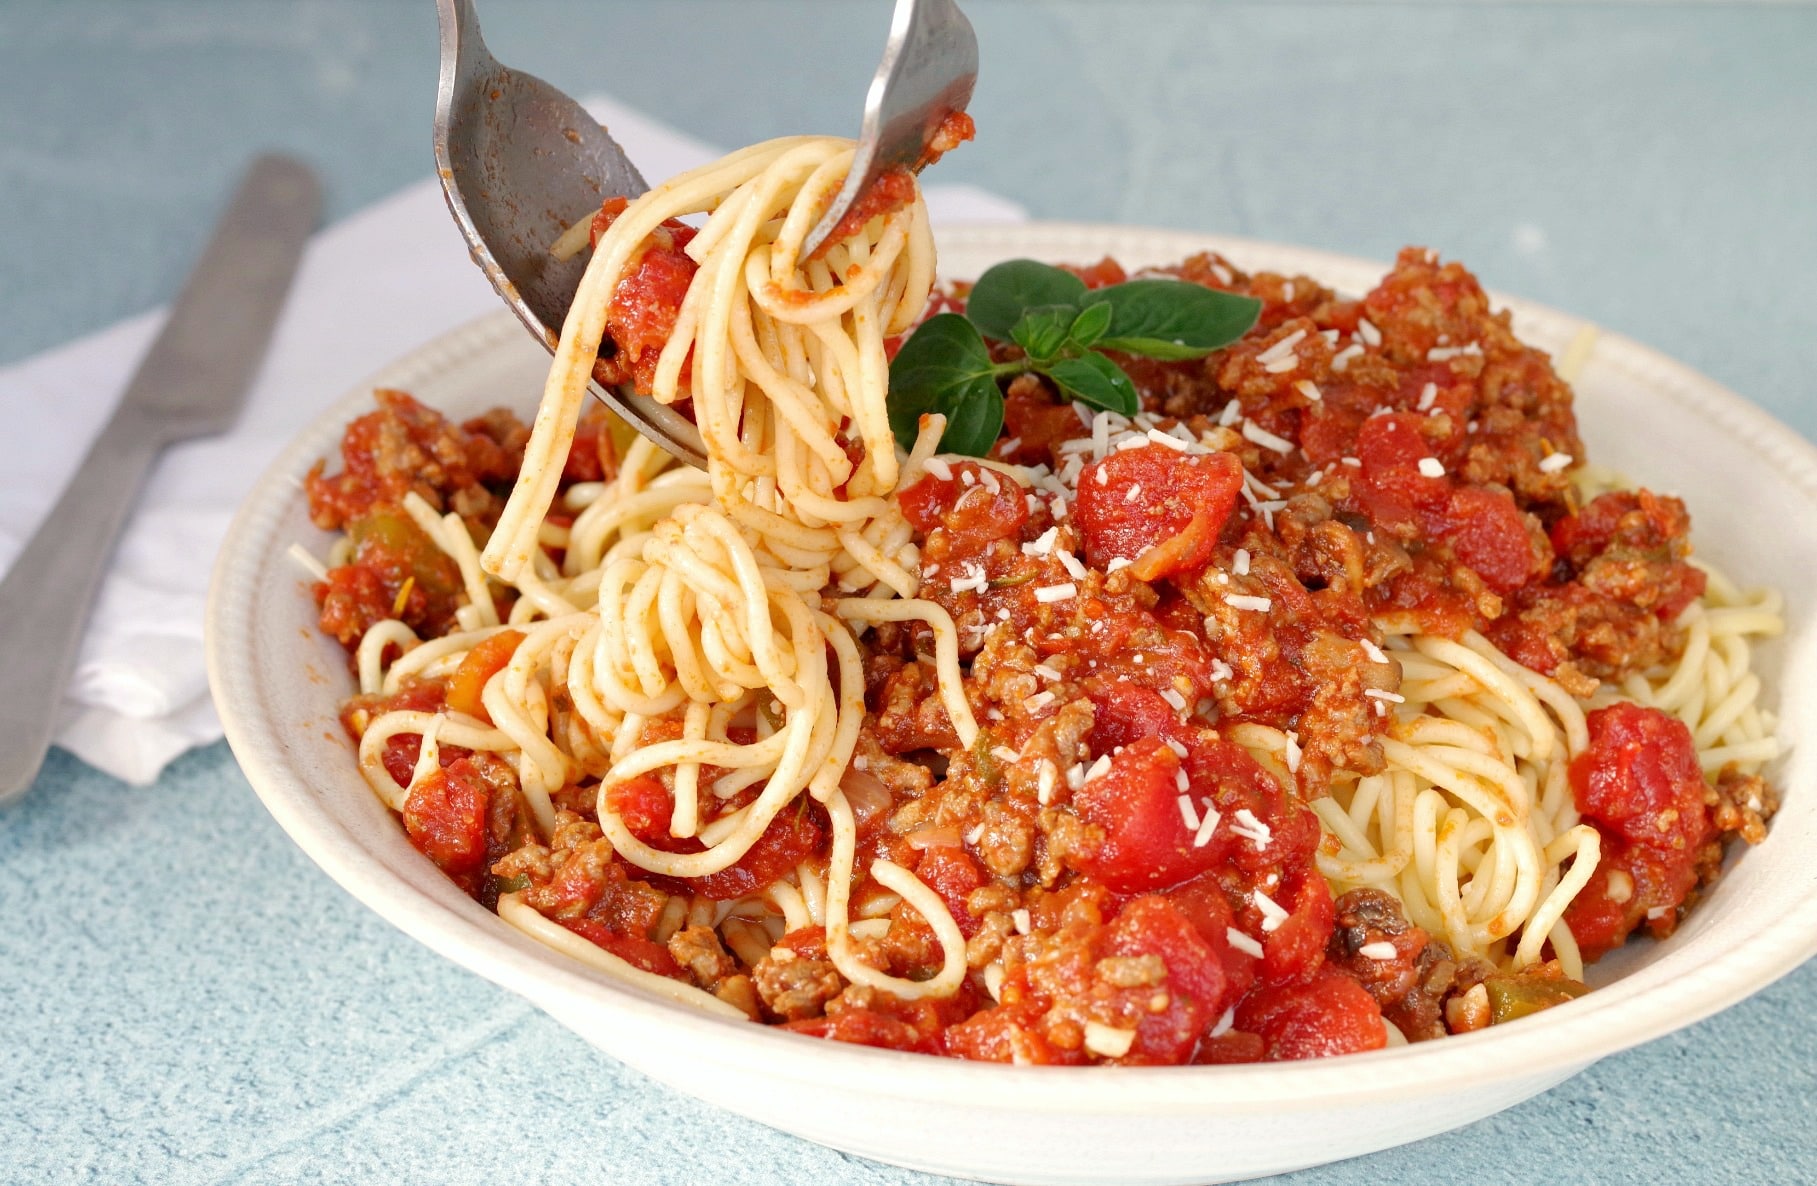 Spaghetti and meat sauce with spaghetti being twirled on fork with spoon